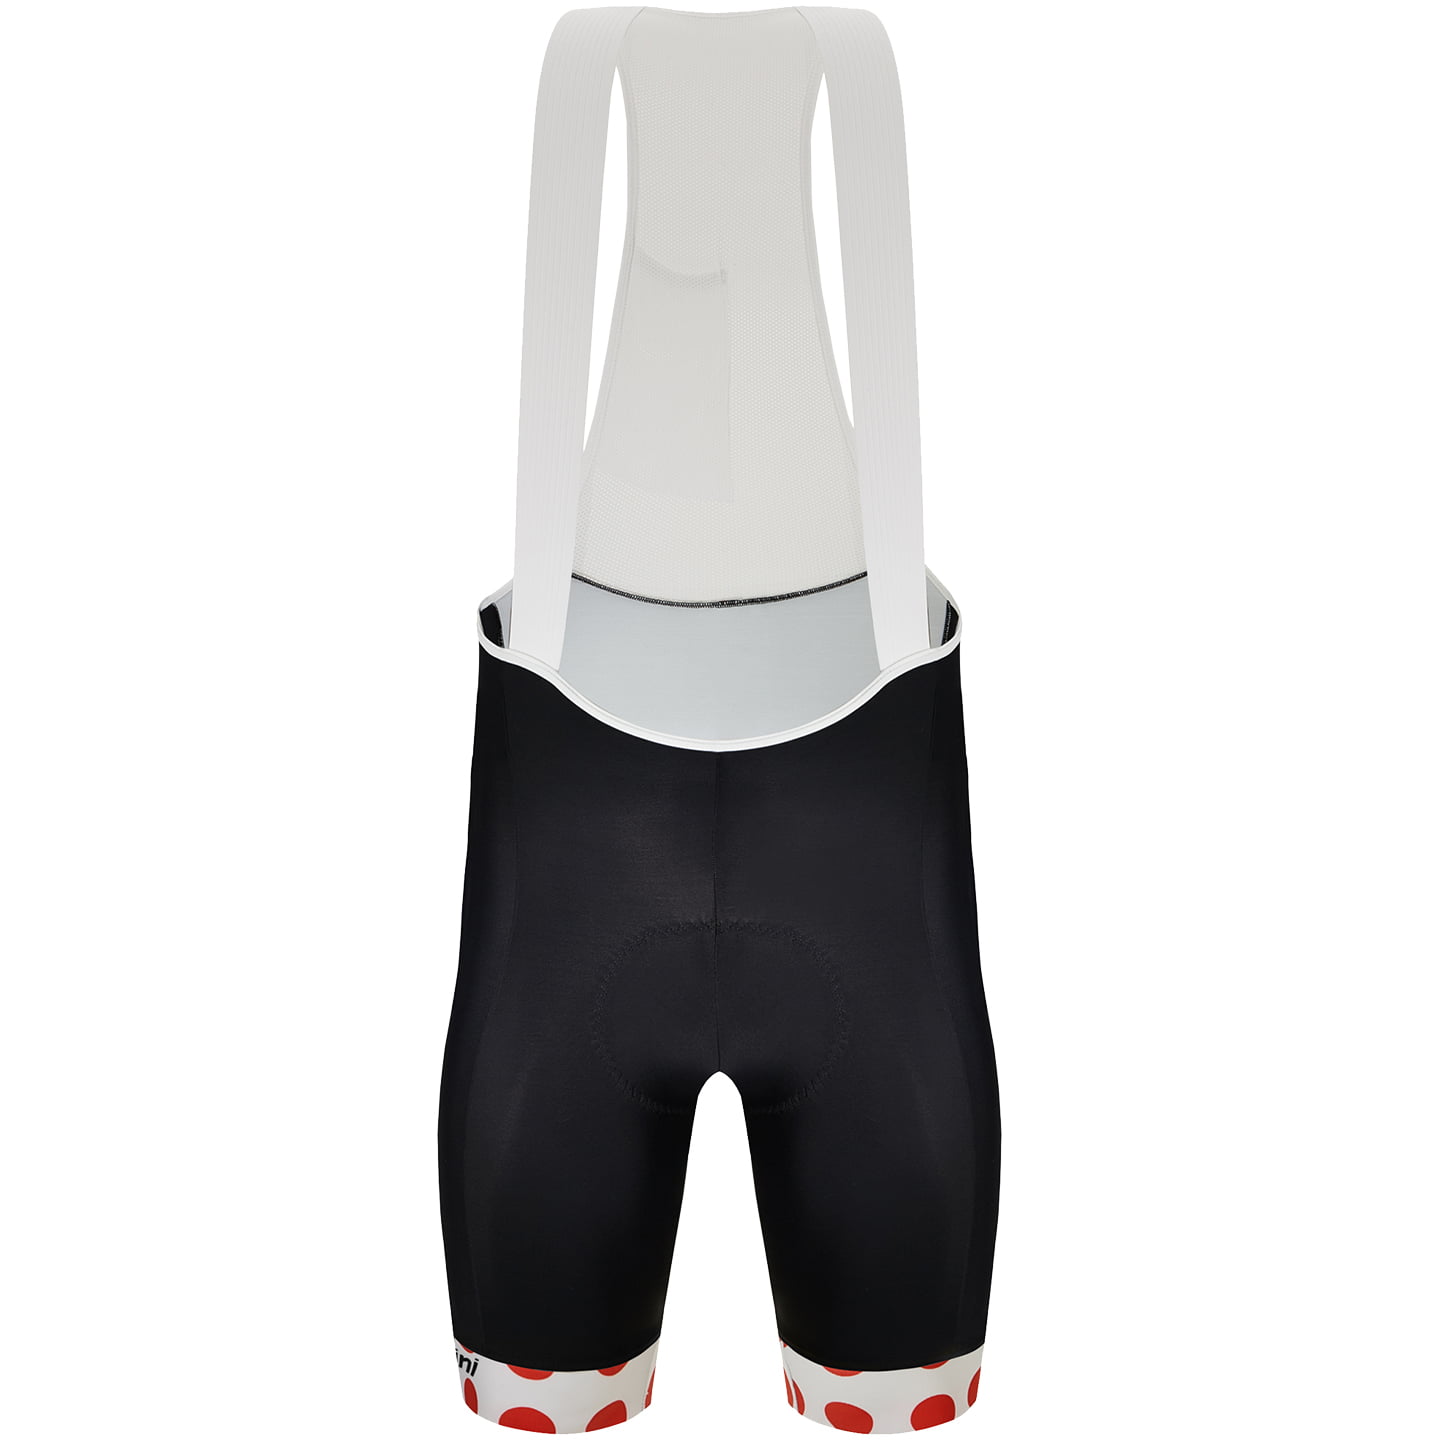 TOUR DE FRANCE Leader 2023 Bib Shorts, for men, size S, Cycle shorts, Cycling clothing